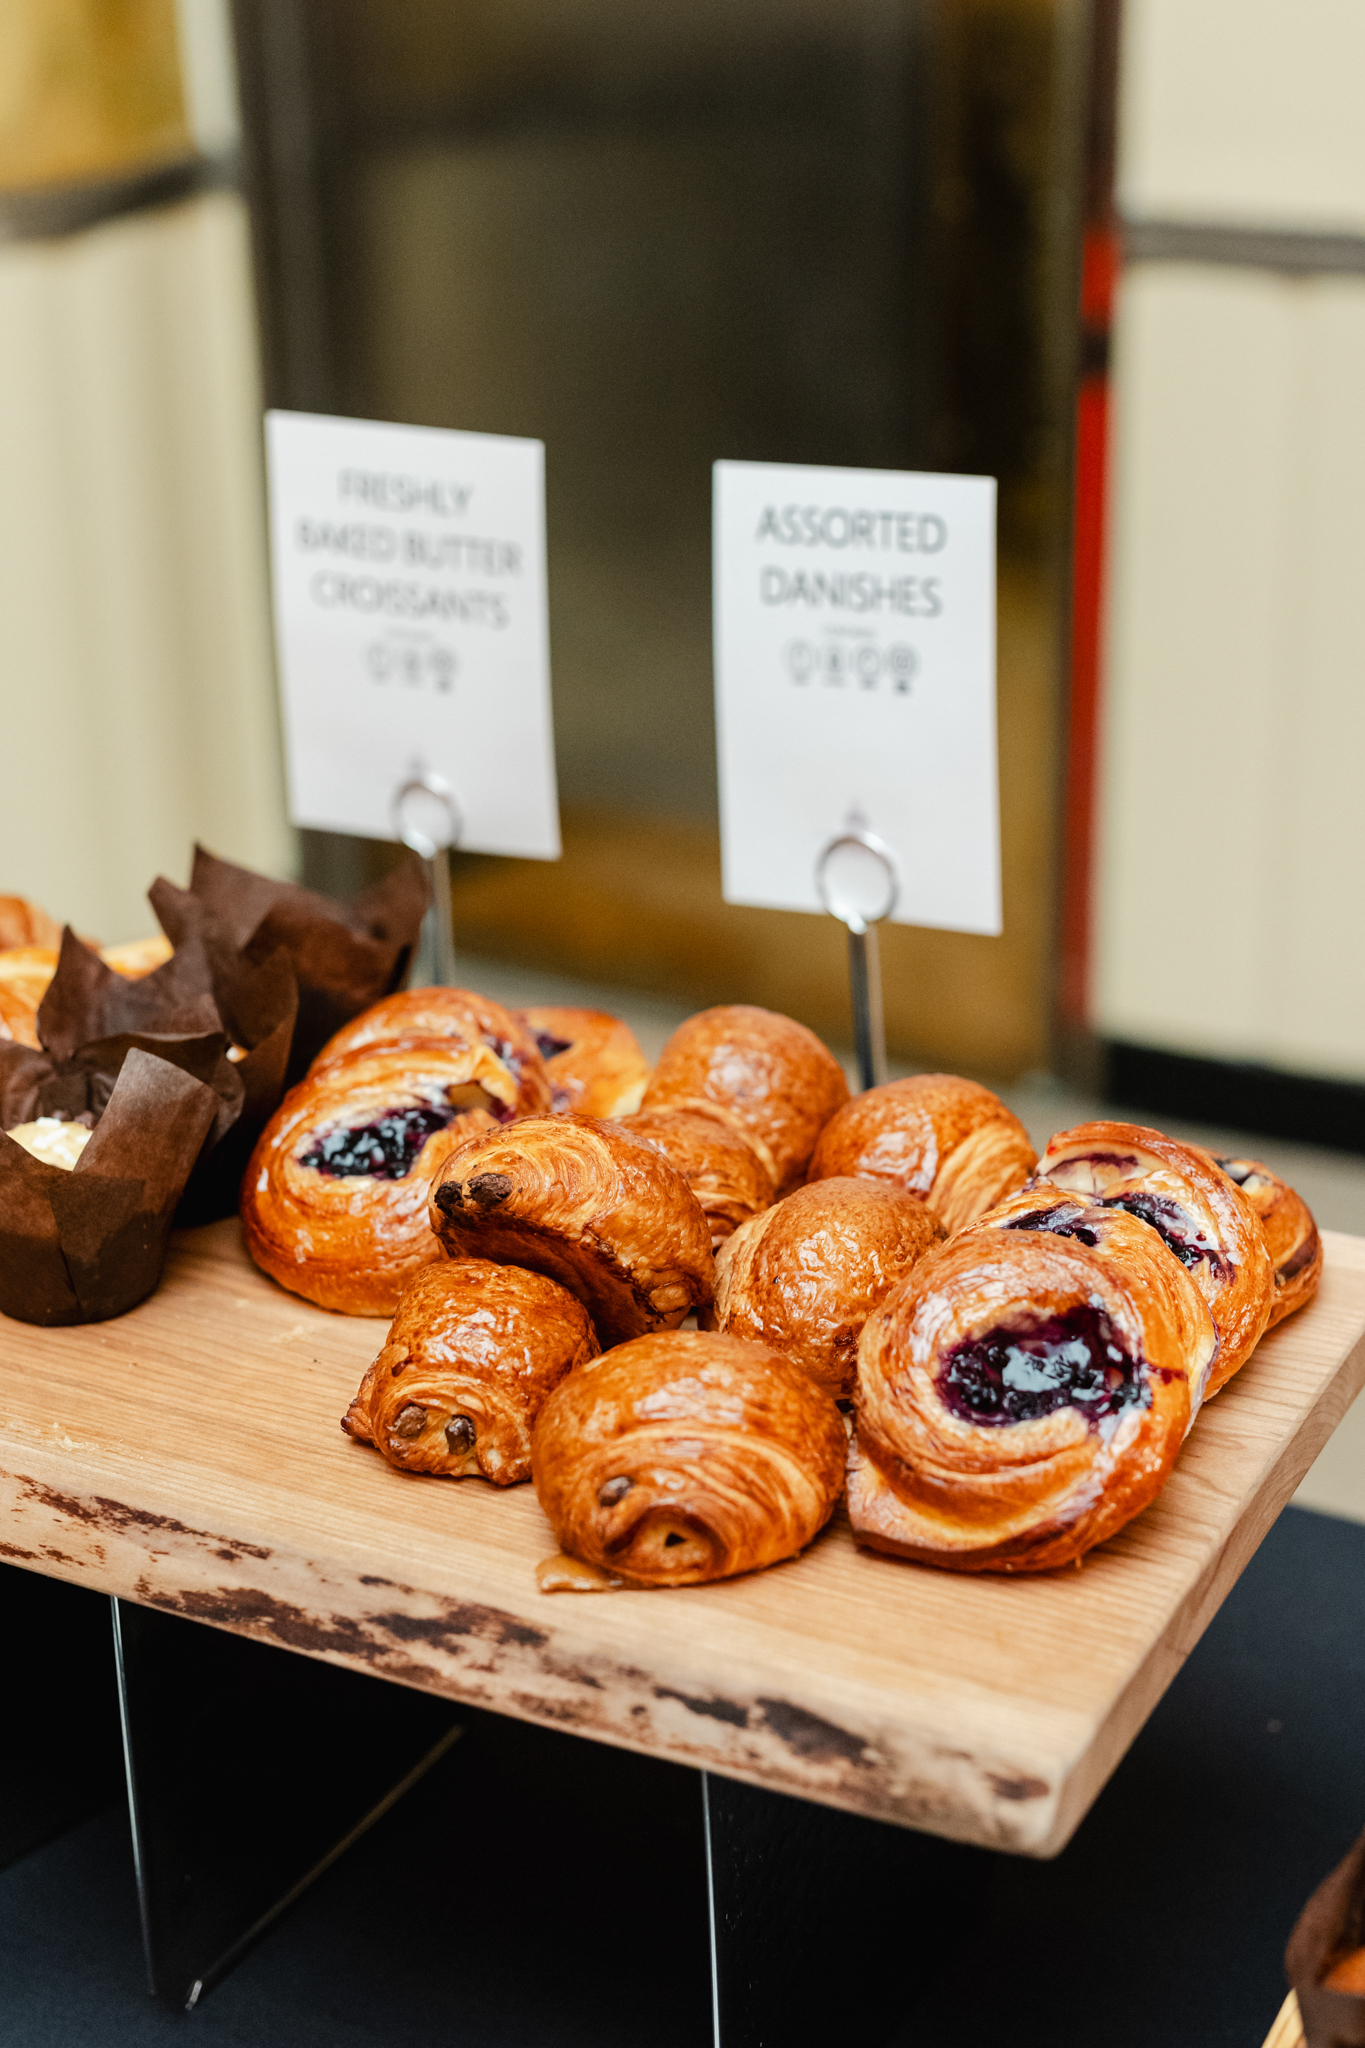 Conference Photography: A display of pastries on a wooden table is captured in this stunning photograph.